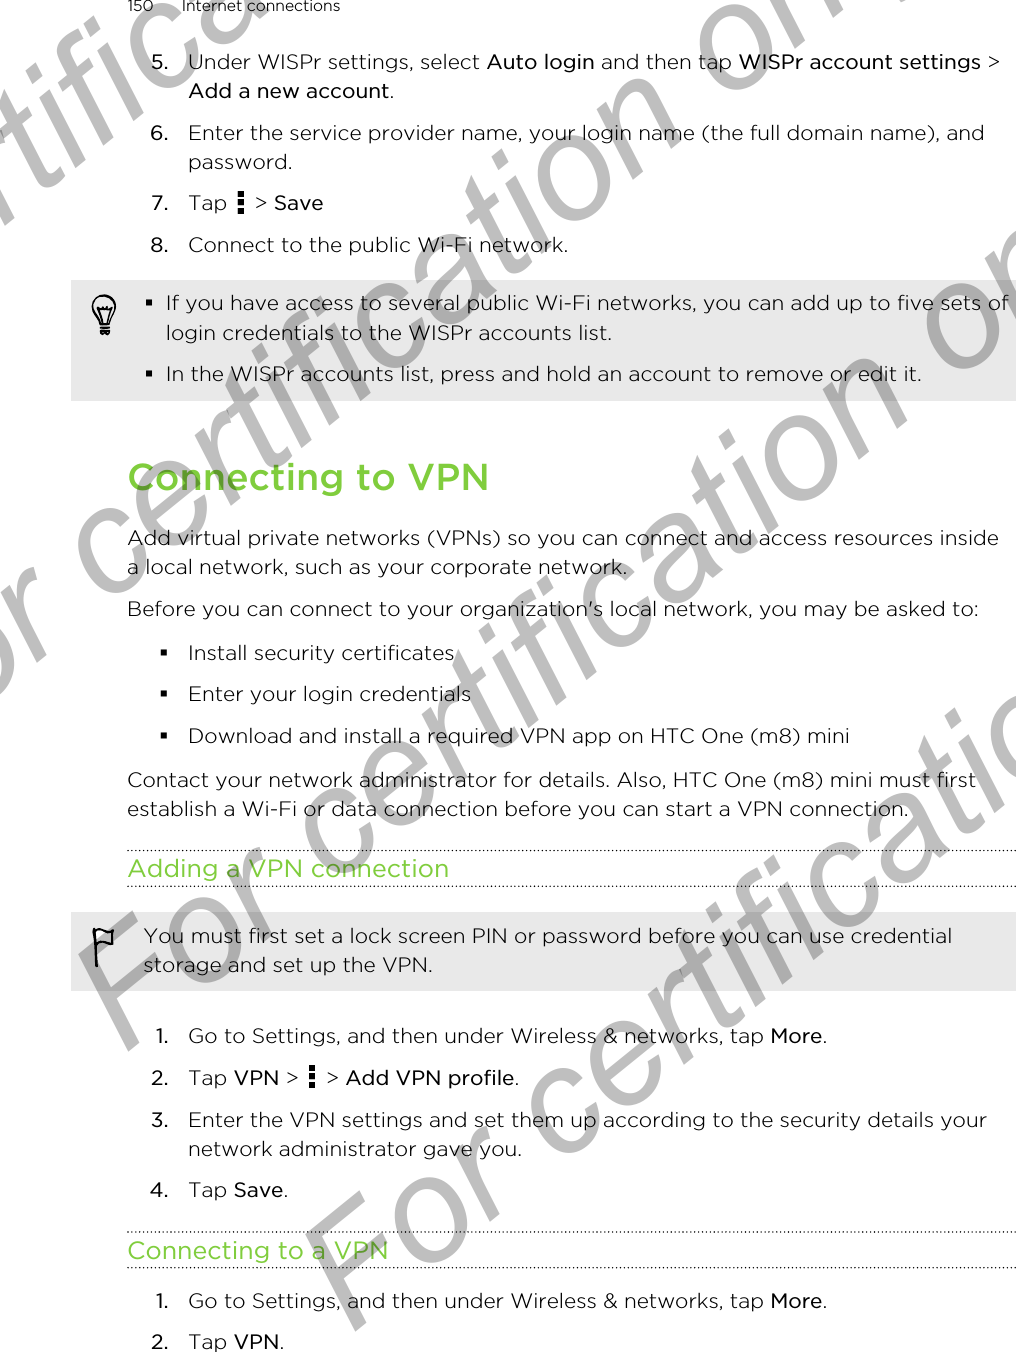 5. Under WISPr settings, select Auto login and then tap WISPr account settings &gt;Add a new account.6. Enter the service provider name, your login name (the full domain name), andpassword.7. Tap   &gt; Save8. Connect to the public Wi-Fi network.§If you have access to several public Wi-Fi networks, you can add up to five sets oflogin credentials to the WISPr accounts list.§In the WISPr accounts list, press and hold an account to remove or edit it.Connecting to VPNAdd virtual private networks (VPNs) so you can connect and access resources insidea local network, such as your corporate network.Before you can connect to your organization&apos;s local network, you may be asked to:§Install security certificates§Enter your login credentials§Download and install a required VPN app on HTC One (m8) miniContact your network administrator for details. Also, HTC One (m8) mini must firstestablish a Wi-Fi or data connection before you can start a VPN connection.Adding a VPN connectionYou must first set a lock screen PIN or password before you can use credentialstorage and set up the VPN.1. Go to Settings, and then under Wireless &amp; networks, tap More.2. Tap VPN &gt;   &gt; Add VPN profile.3. Enter the VPN settings and set them up according to the security details yournetwork administrator gave you.4. Tap Save.Connecting to a VPN1. Go to Settings, and then under Wireless &amp; networks, tap More.2. Tap VPN.150 Internet connectionsFor certification  For certification only  For certification only  For certification only 